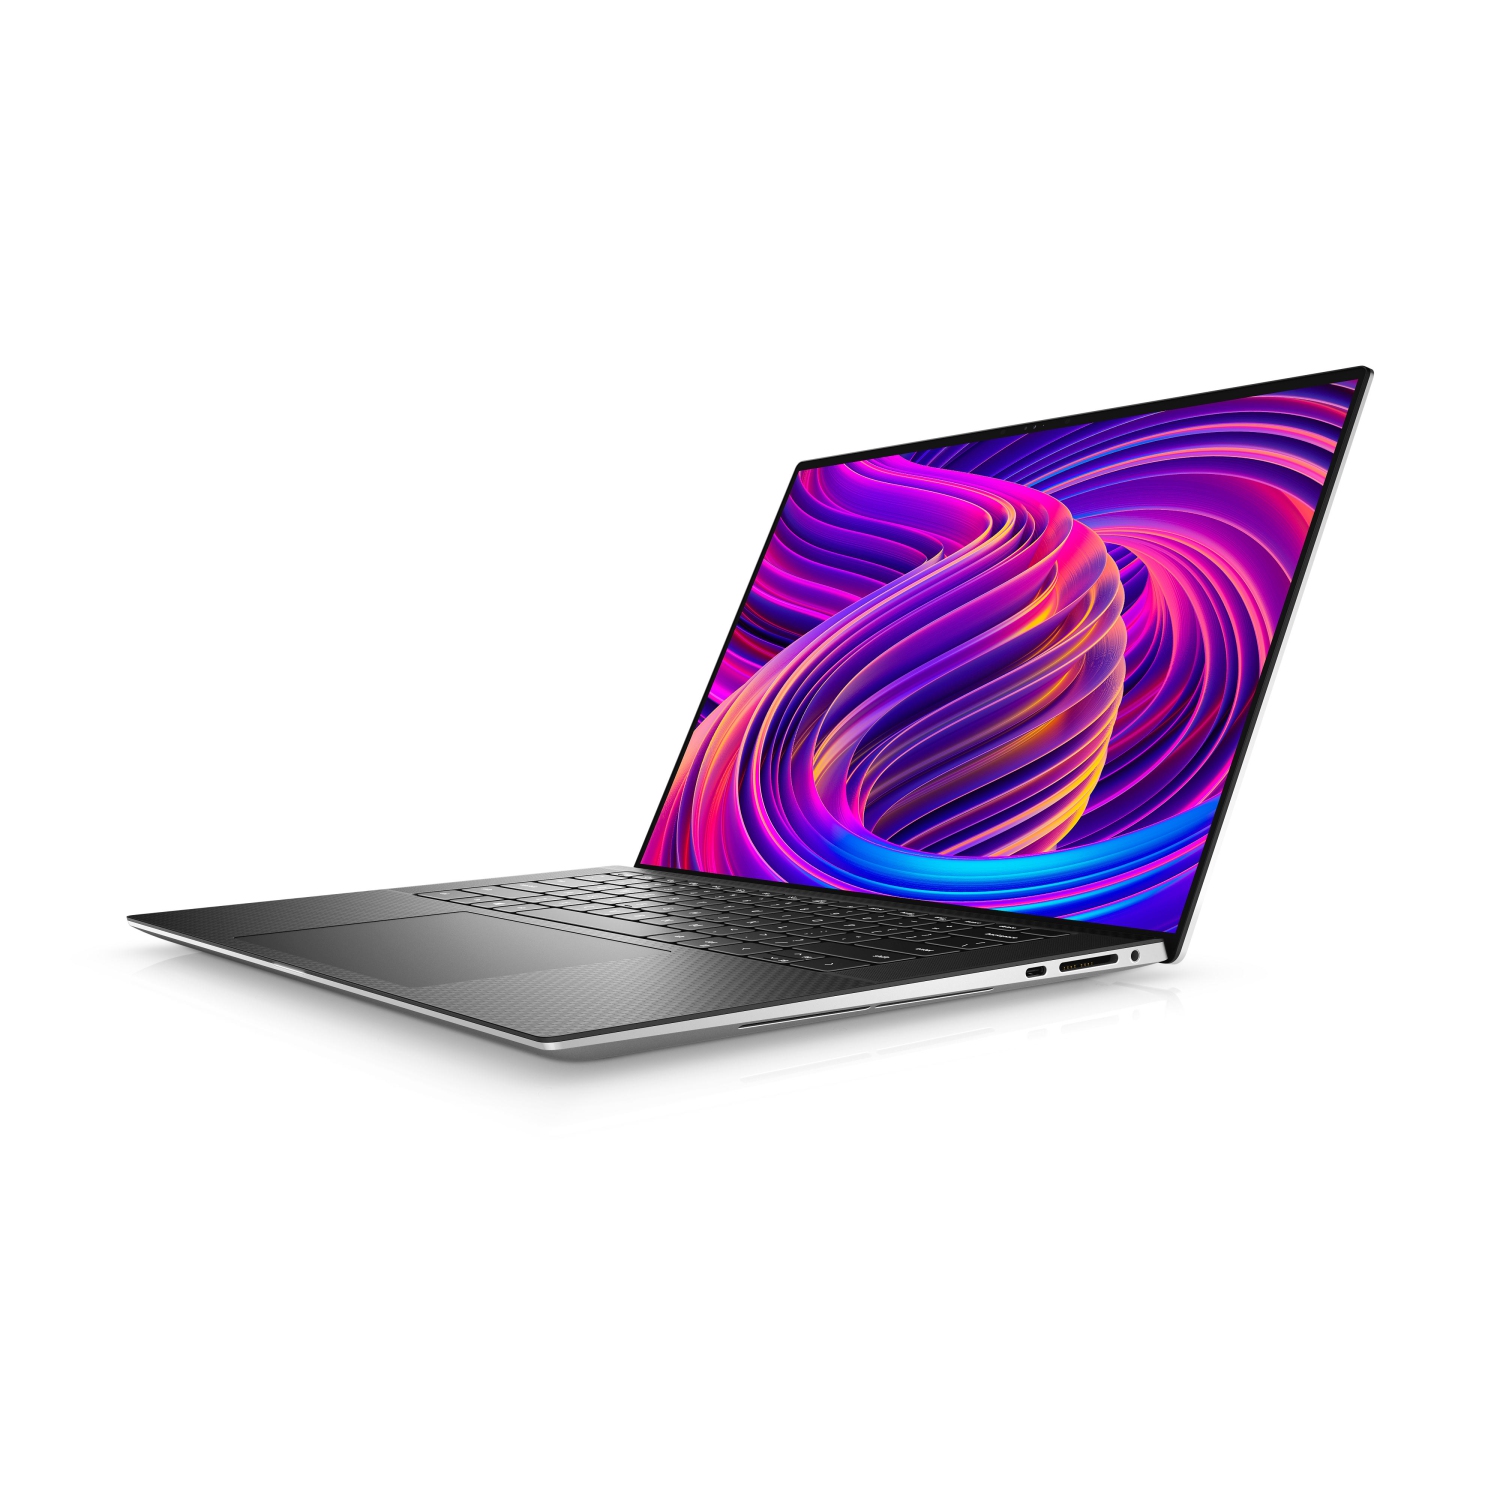 Refurbished (Excellent) - Dell XPS 15 9510 Laptop (2021) | 15.6" FHD+ | Core i7 - 2TB SSD - 32GB RAM - 3050 Ti | 8 Cores @ 4.6 GHz - 11th Gen CPU Certified Refurbished